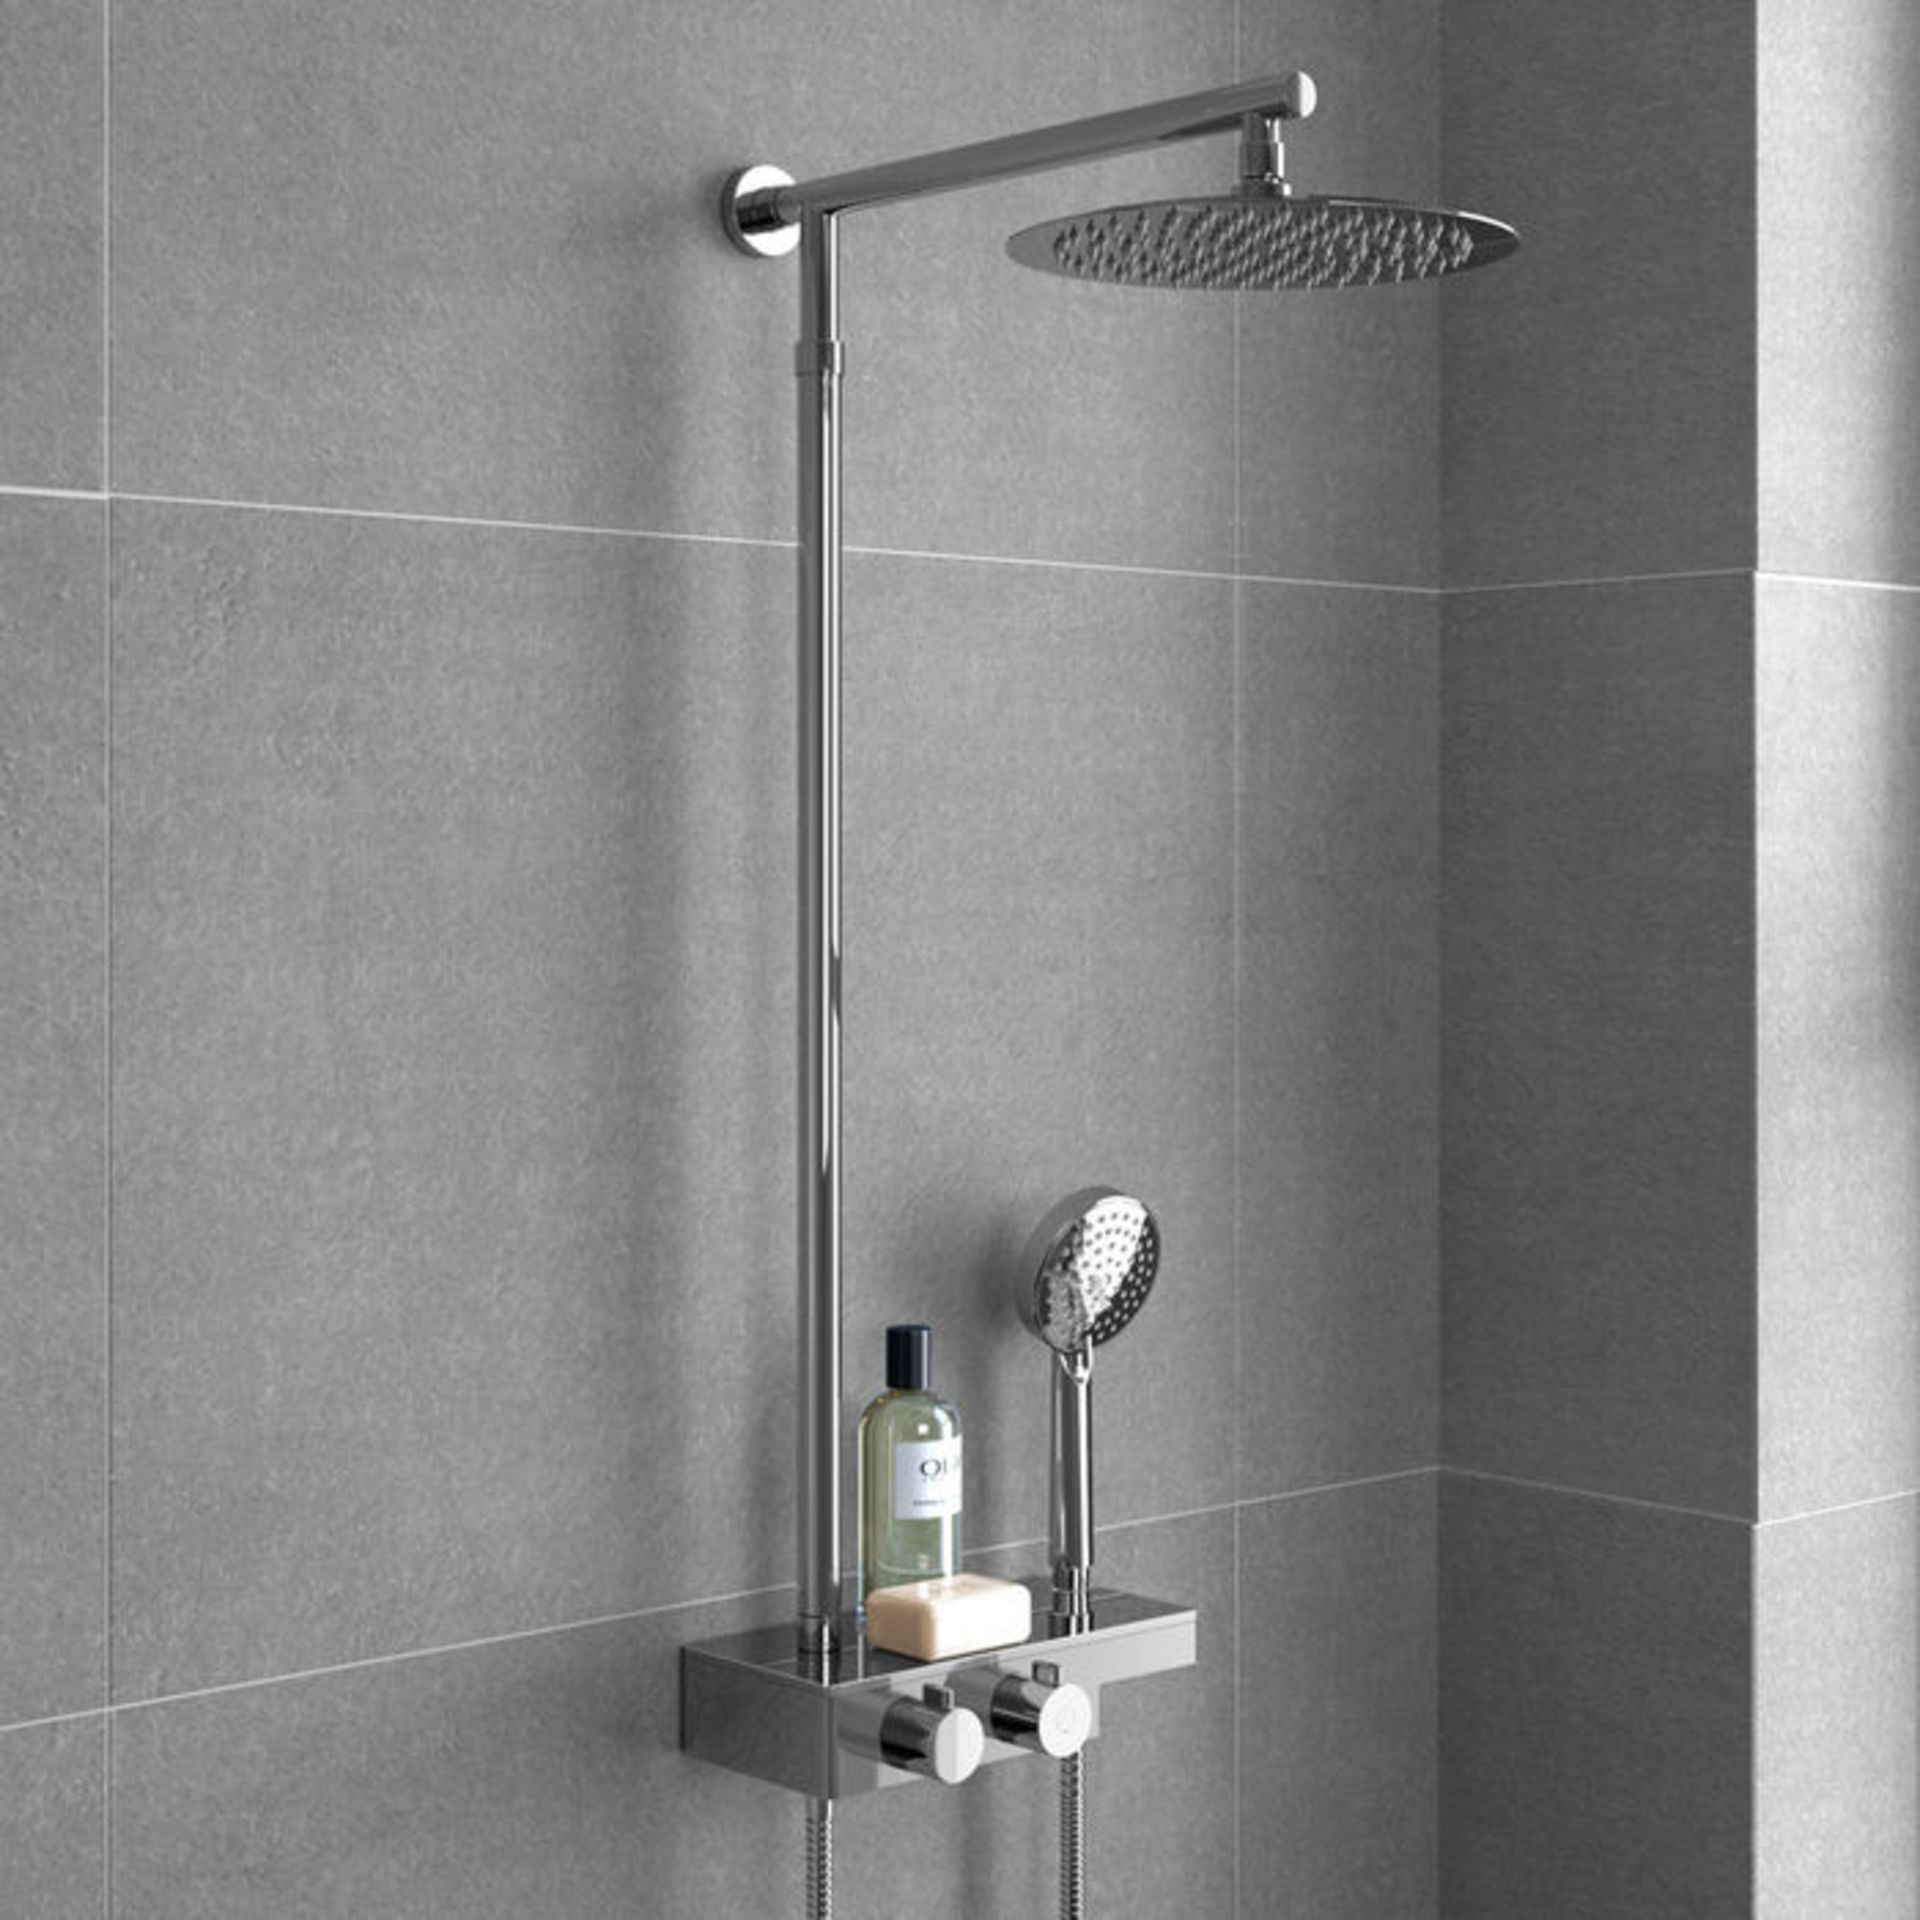 (KL36) Round Exposed Thermostatic Mixer Shower Kit & Large Head. Cool to touch shower for additional - Image 3 of 4